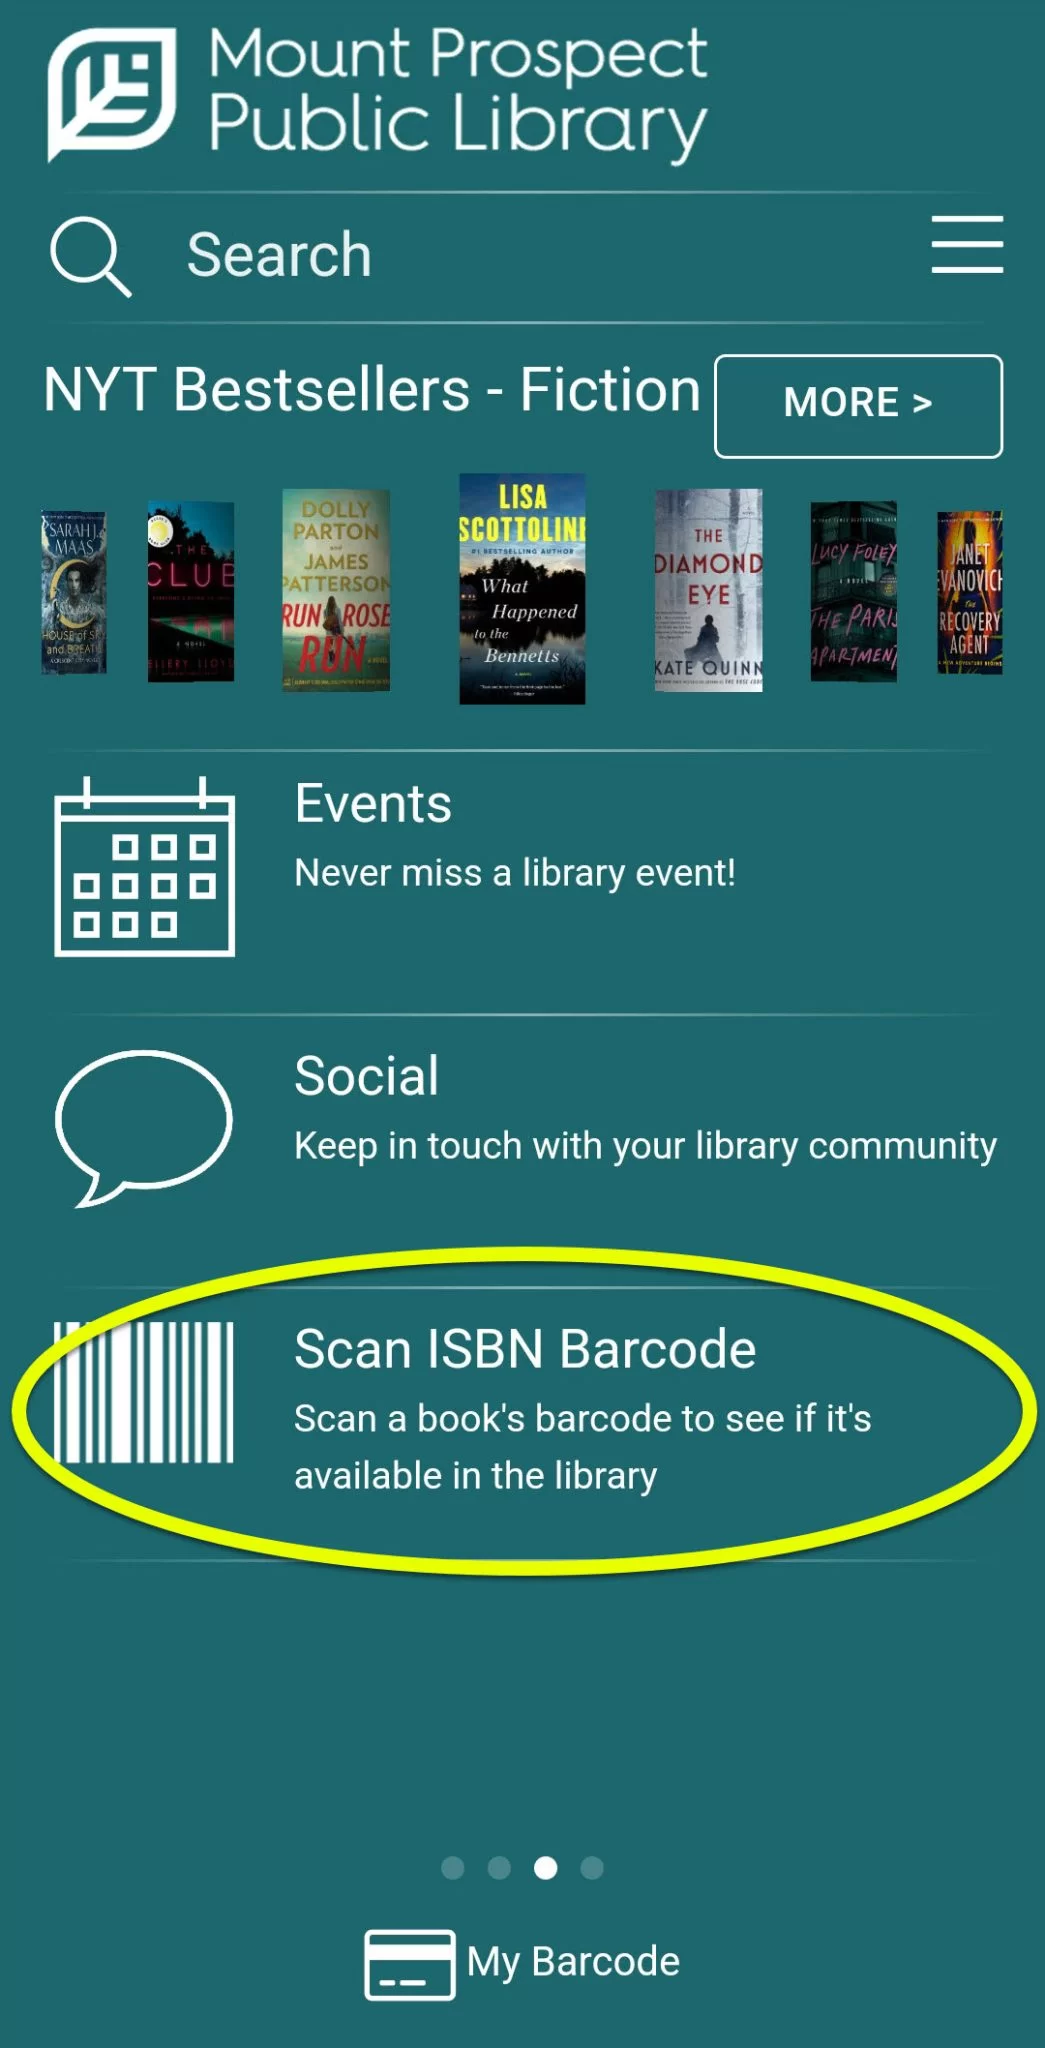 Scan ISBN barcode to see if it's available in the library. Screenshot.